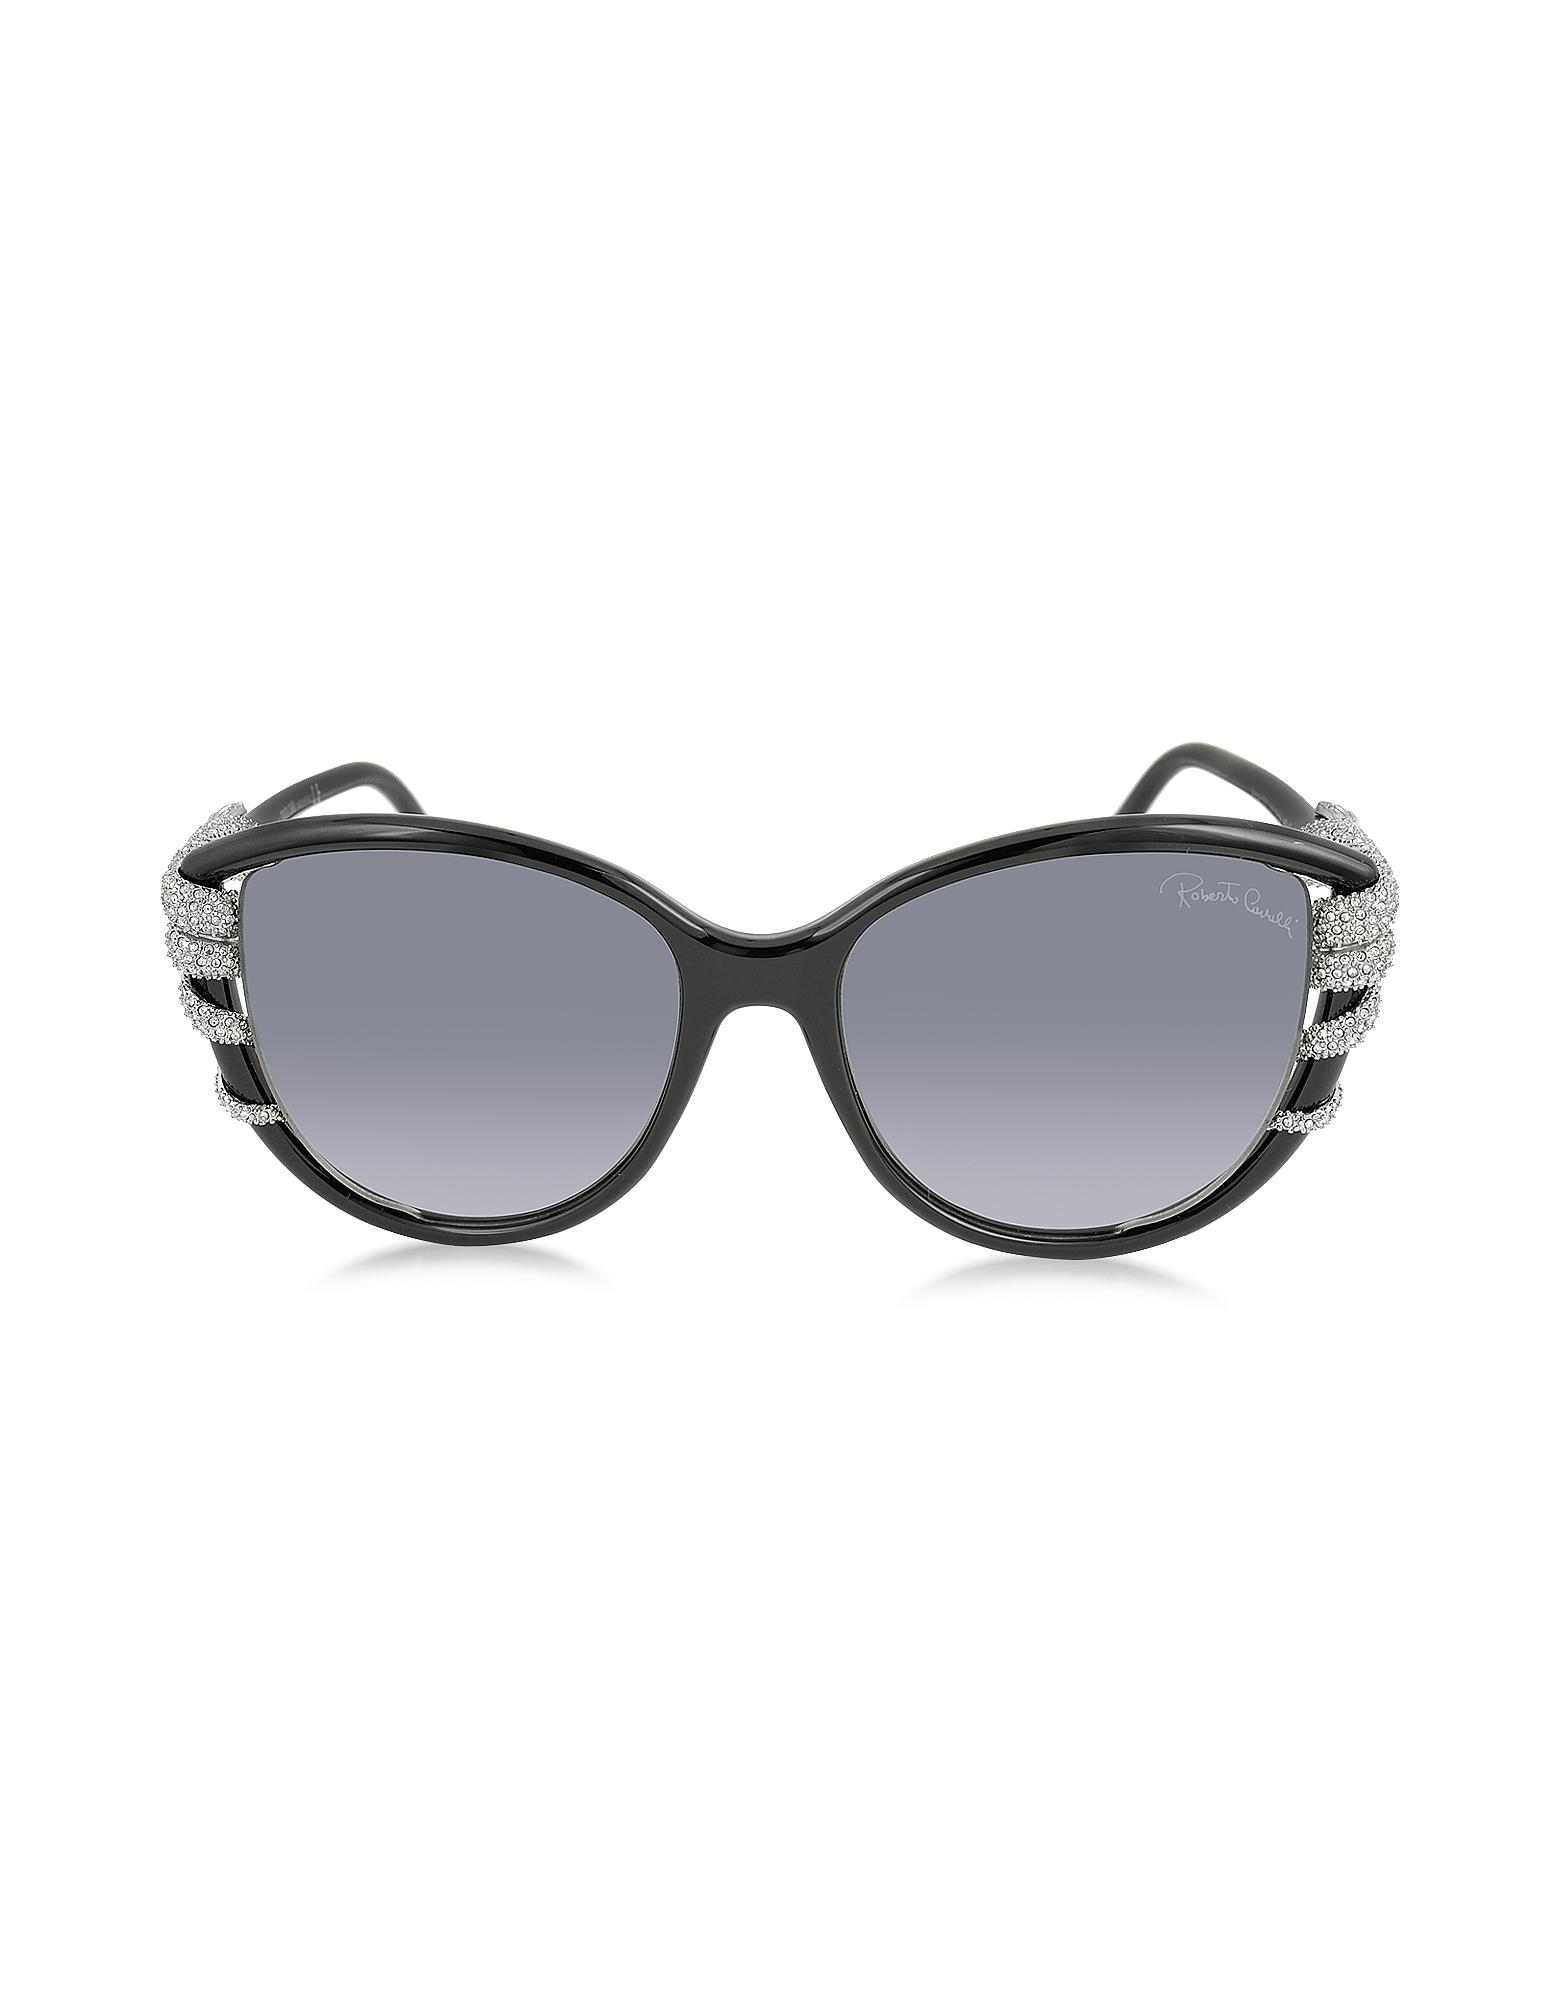 Roberto Cavalli Sterope 972s Acetate And Crystals Cat Eye Women's